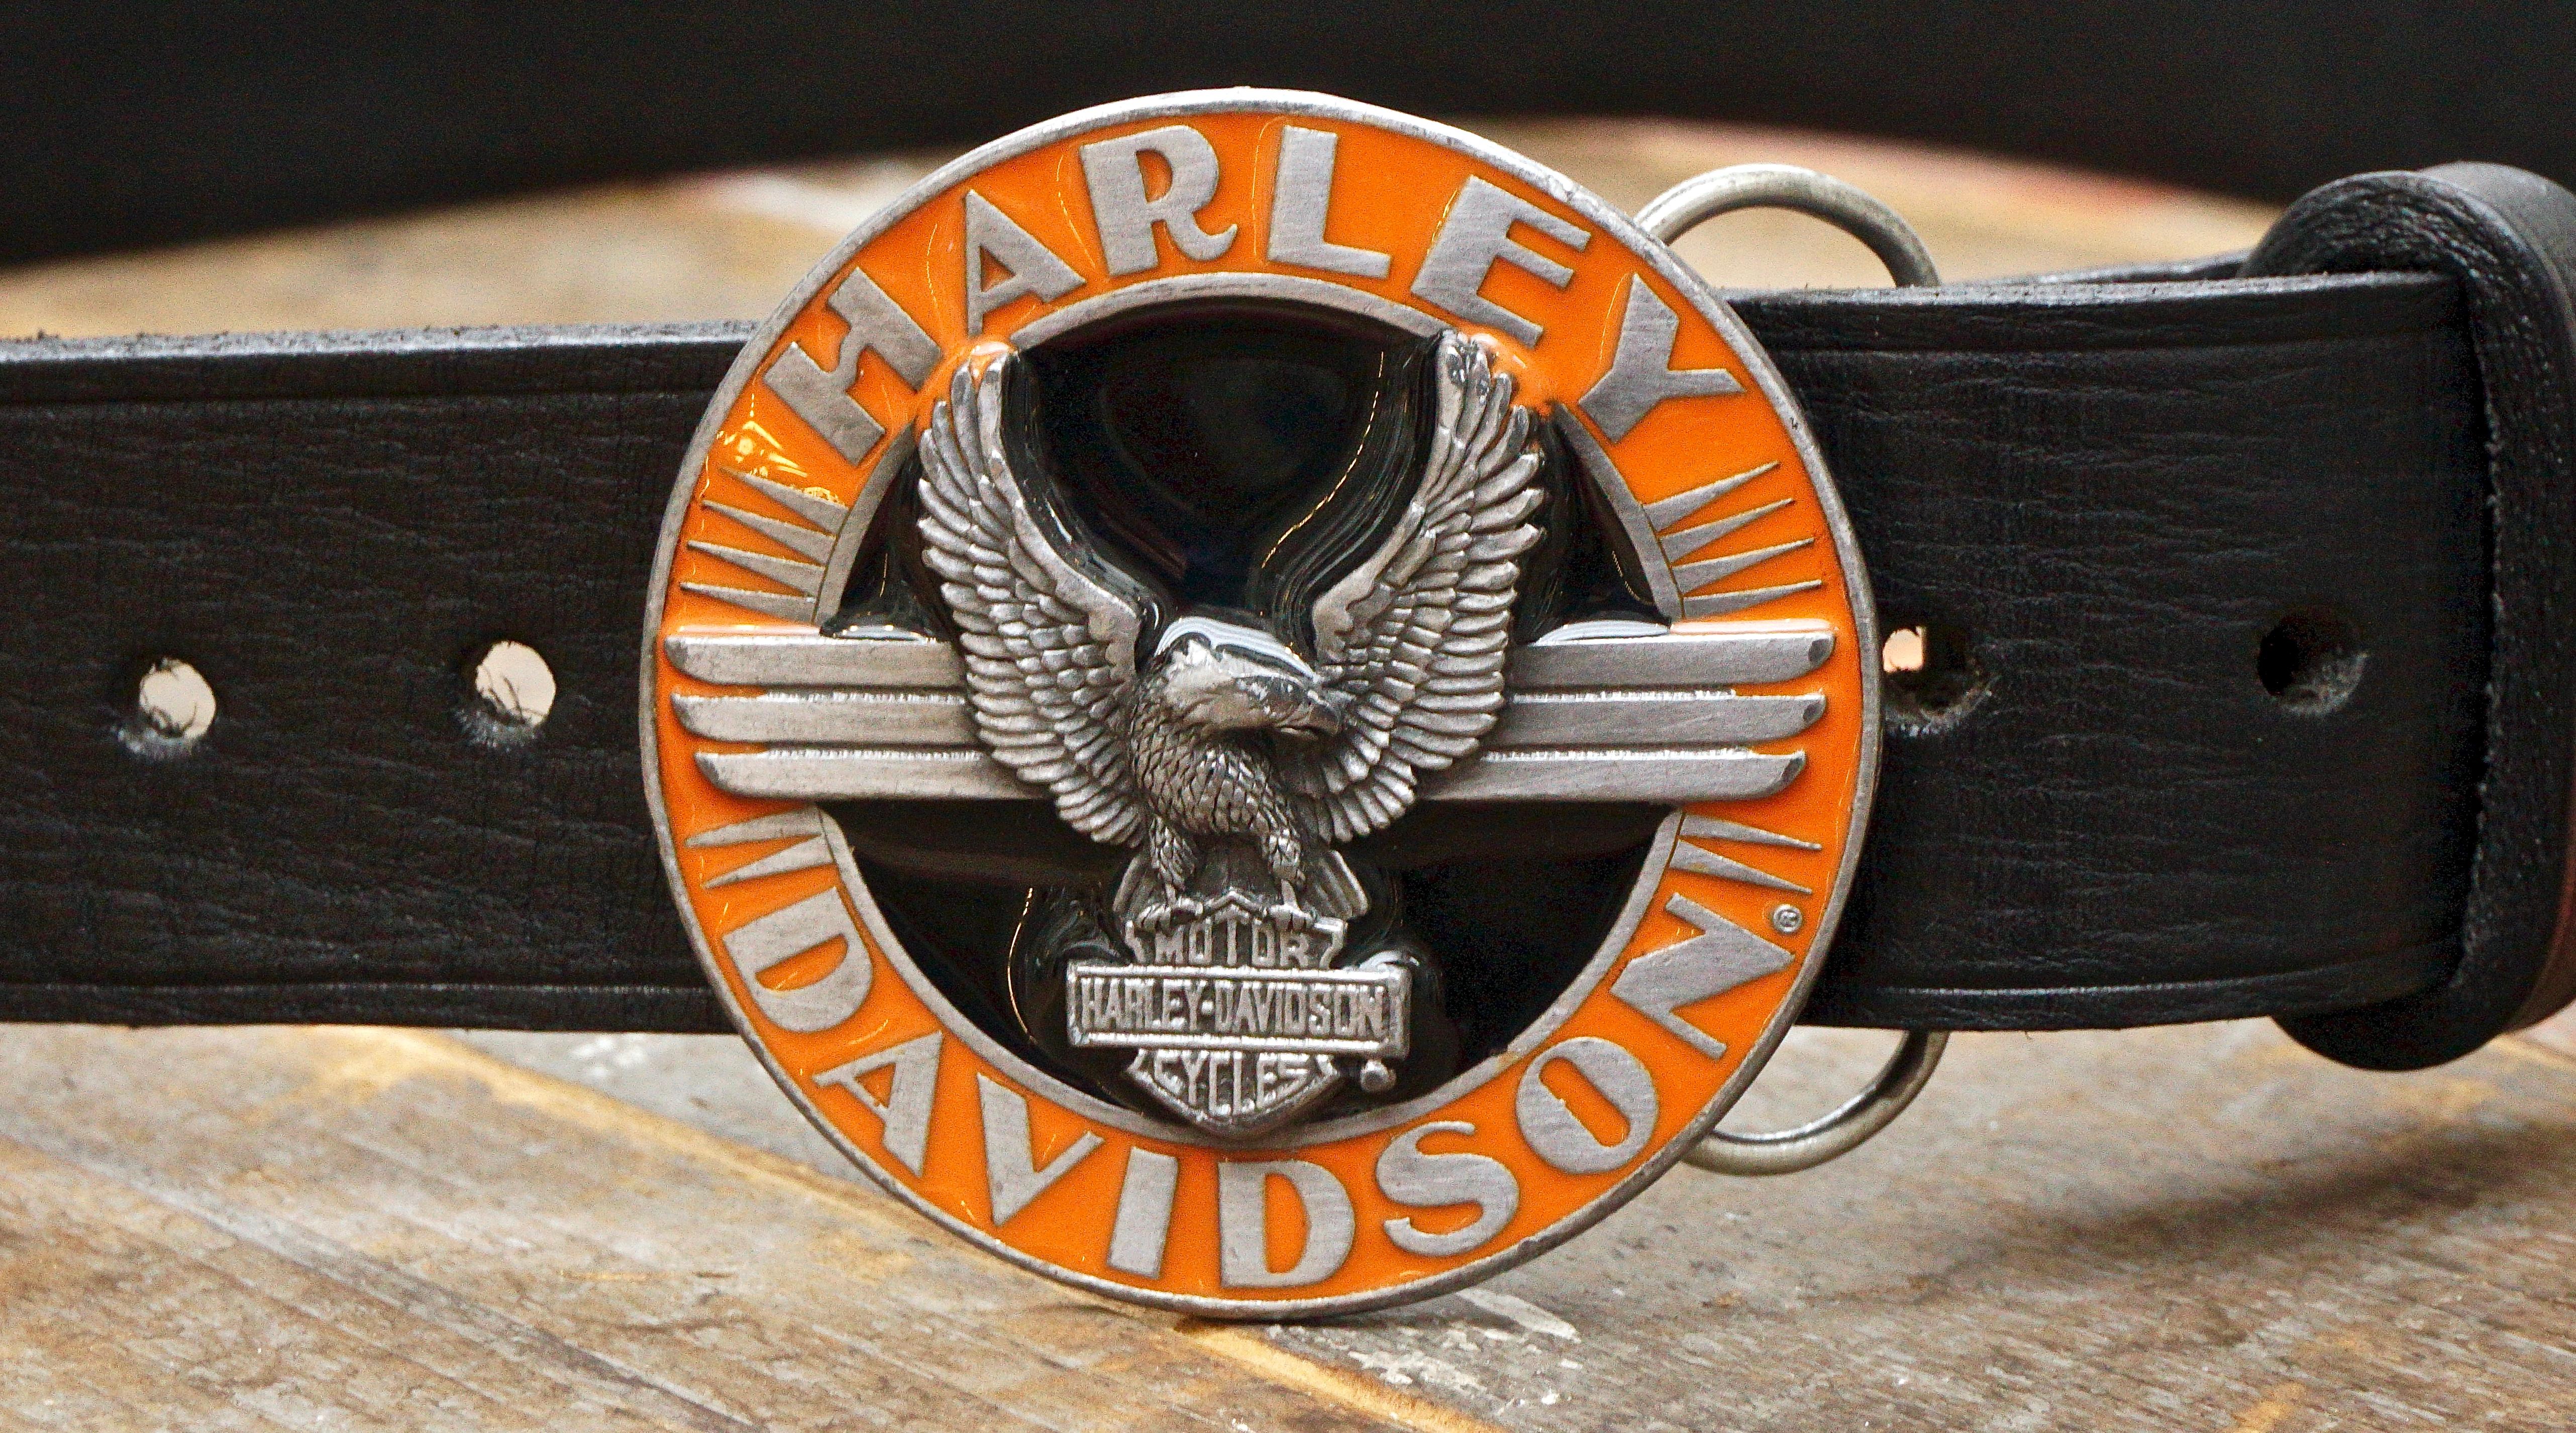 Official Harley Davidson thick black leather belt featuring the round orange and black enamel eagle buckle, circa 1992.  Measuring length (to the longest belt hole) 114.3cm / 45 inches by width 3.7cm / 1.45 inch and depth 4mm / .16 inch. The buckle